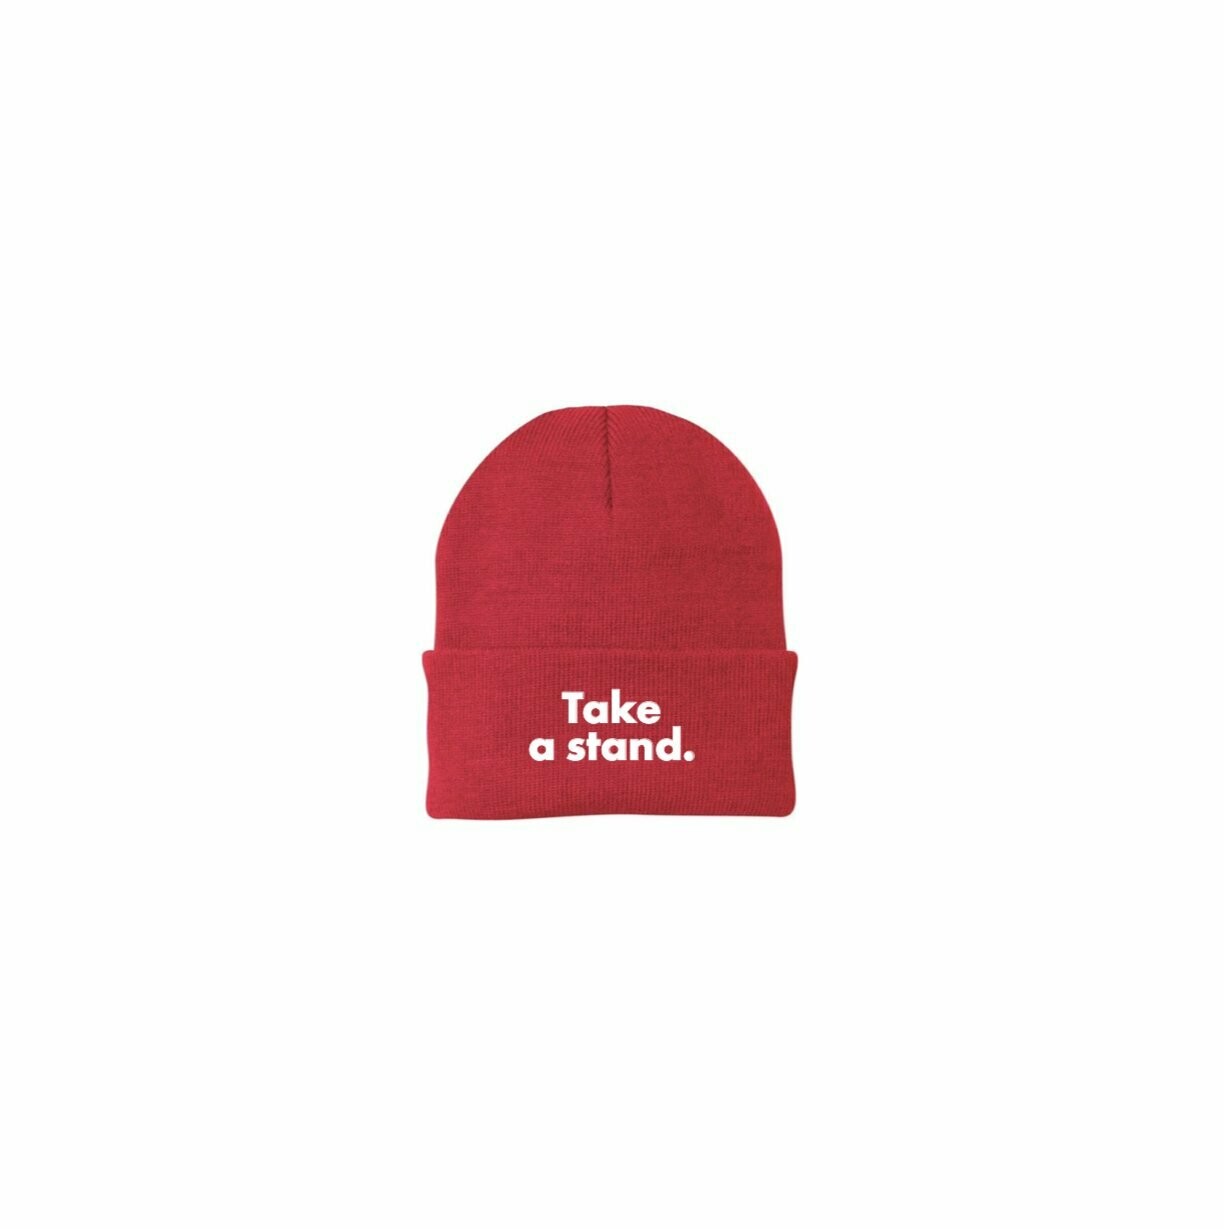 PACKWEAR Beanies, Type: TAKE A STAND